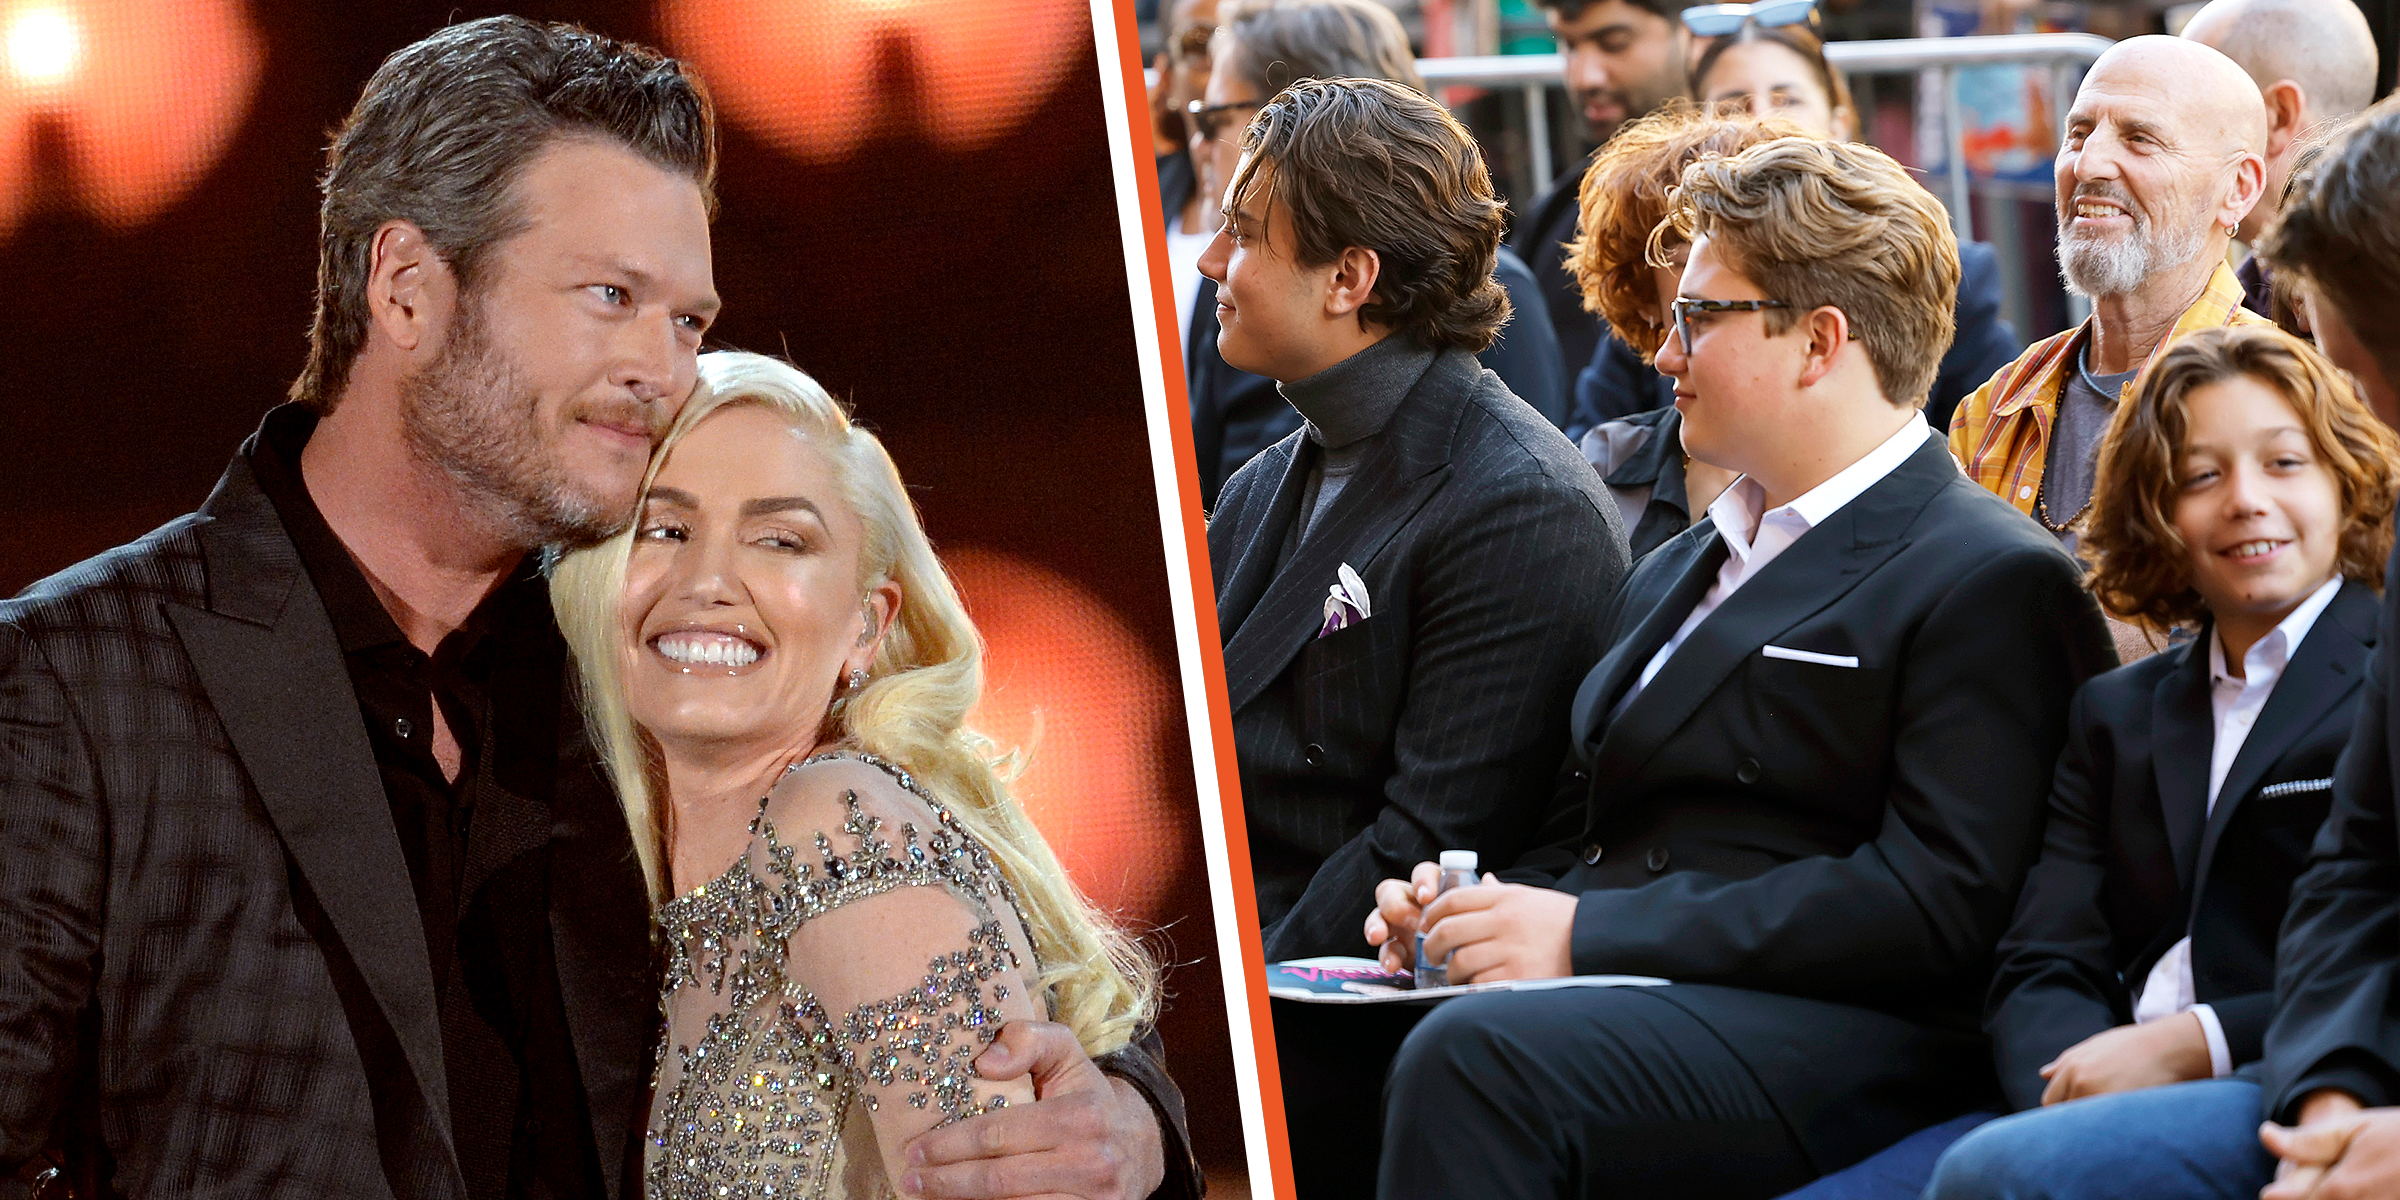 Blake Shelton and Gwen Stefani | Kingston, Zuma, and Apollo Rossdale | Source: Getty Images